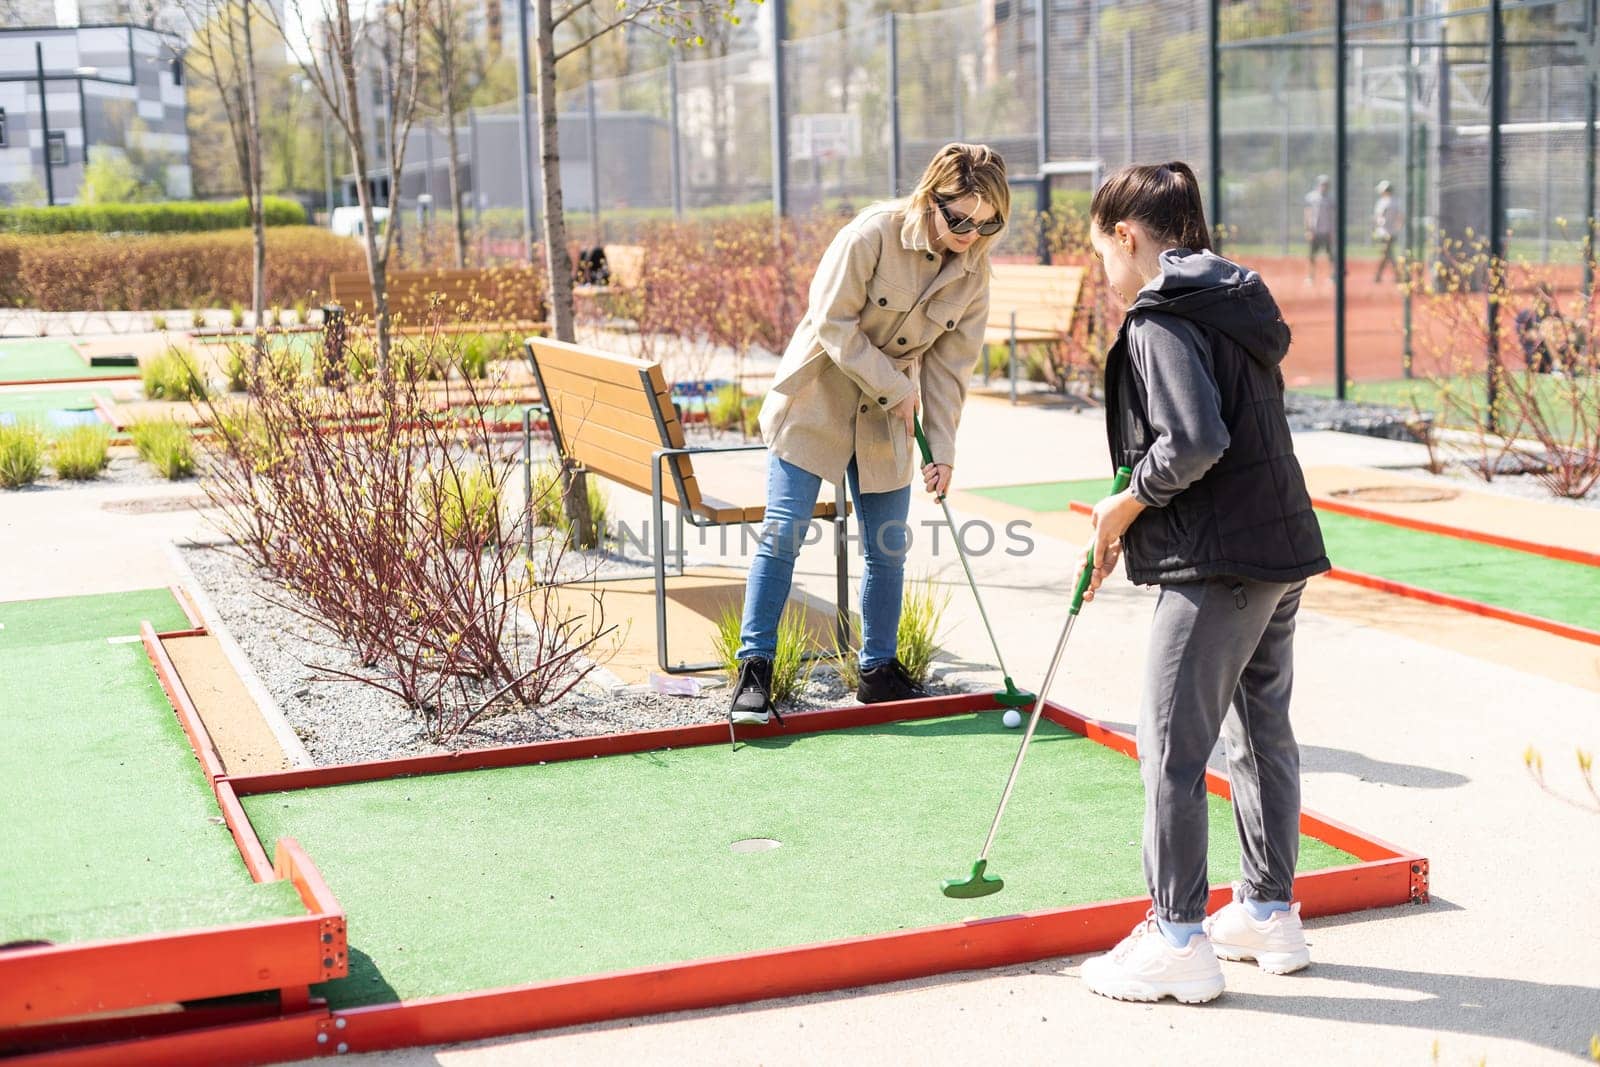 mother and daughter enjoying together playing mini golf in the city